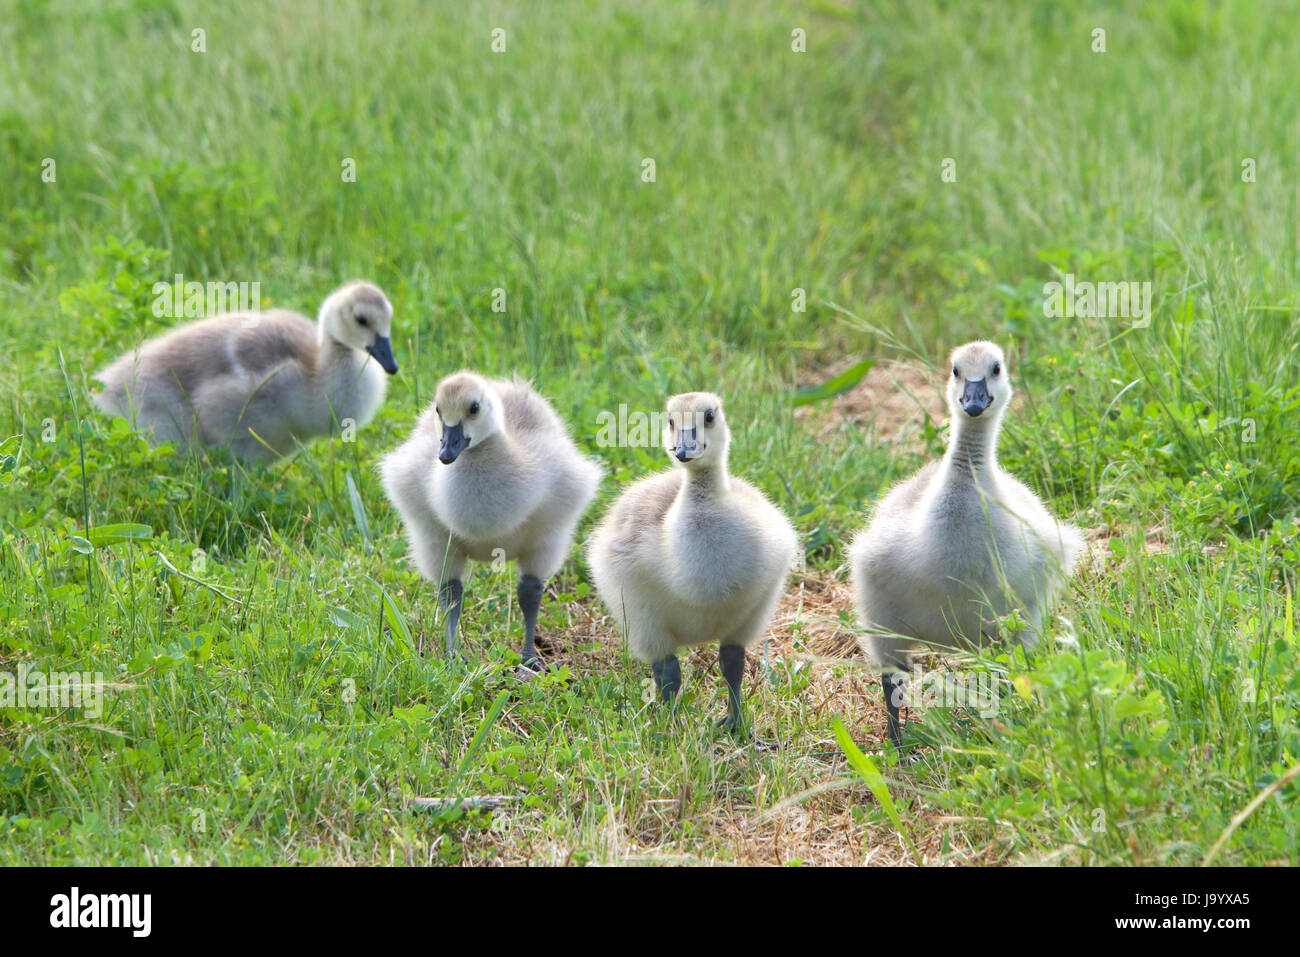 Goslings foraging for food in the grass. Canada geese are able to establish breeding colonies in urban areas, which provide food and few natural preda Stock Photo